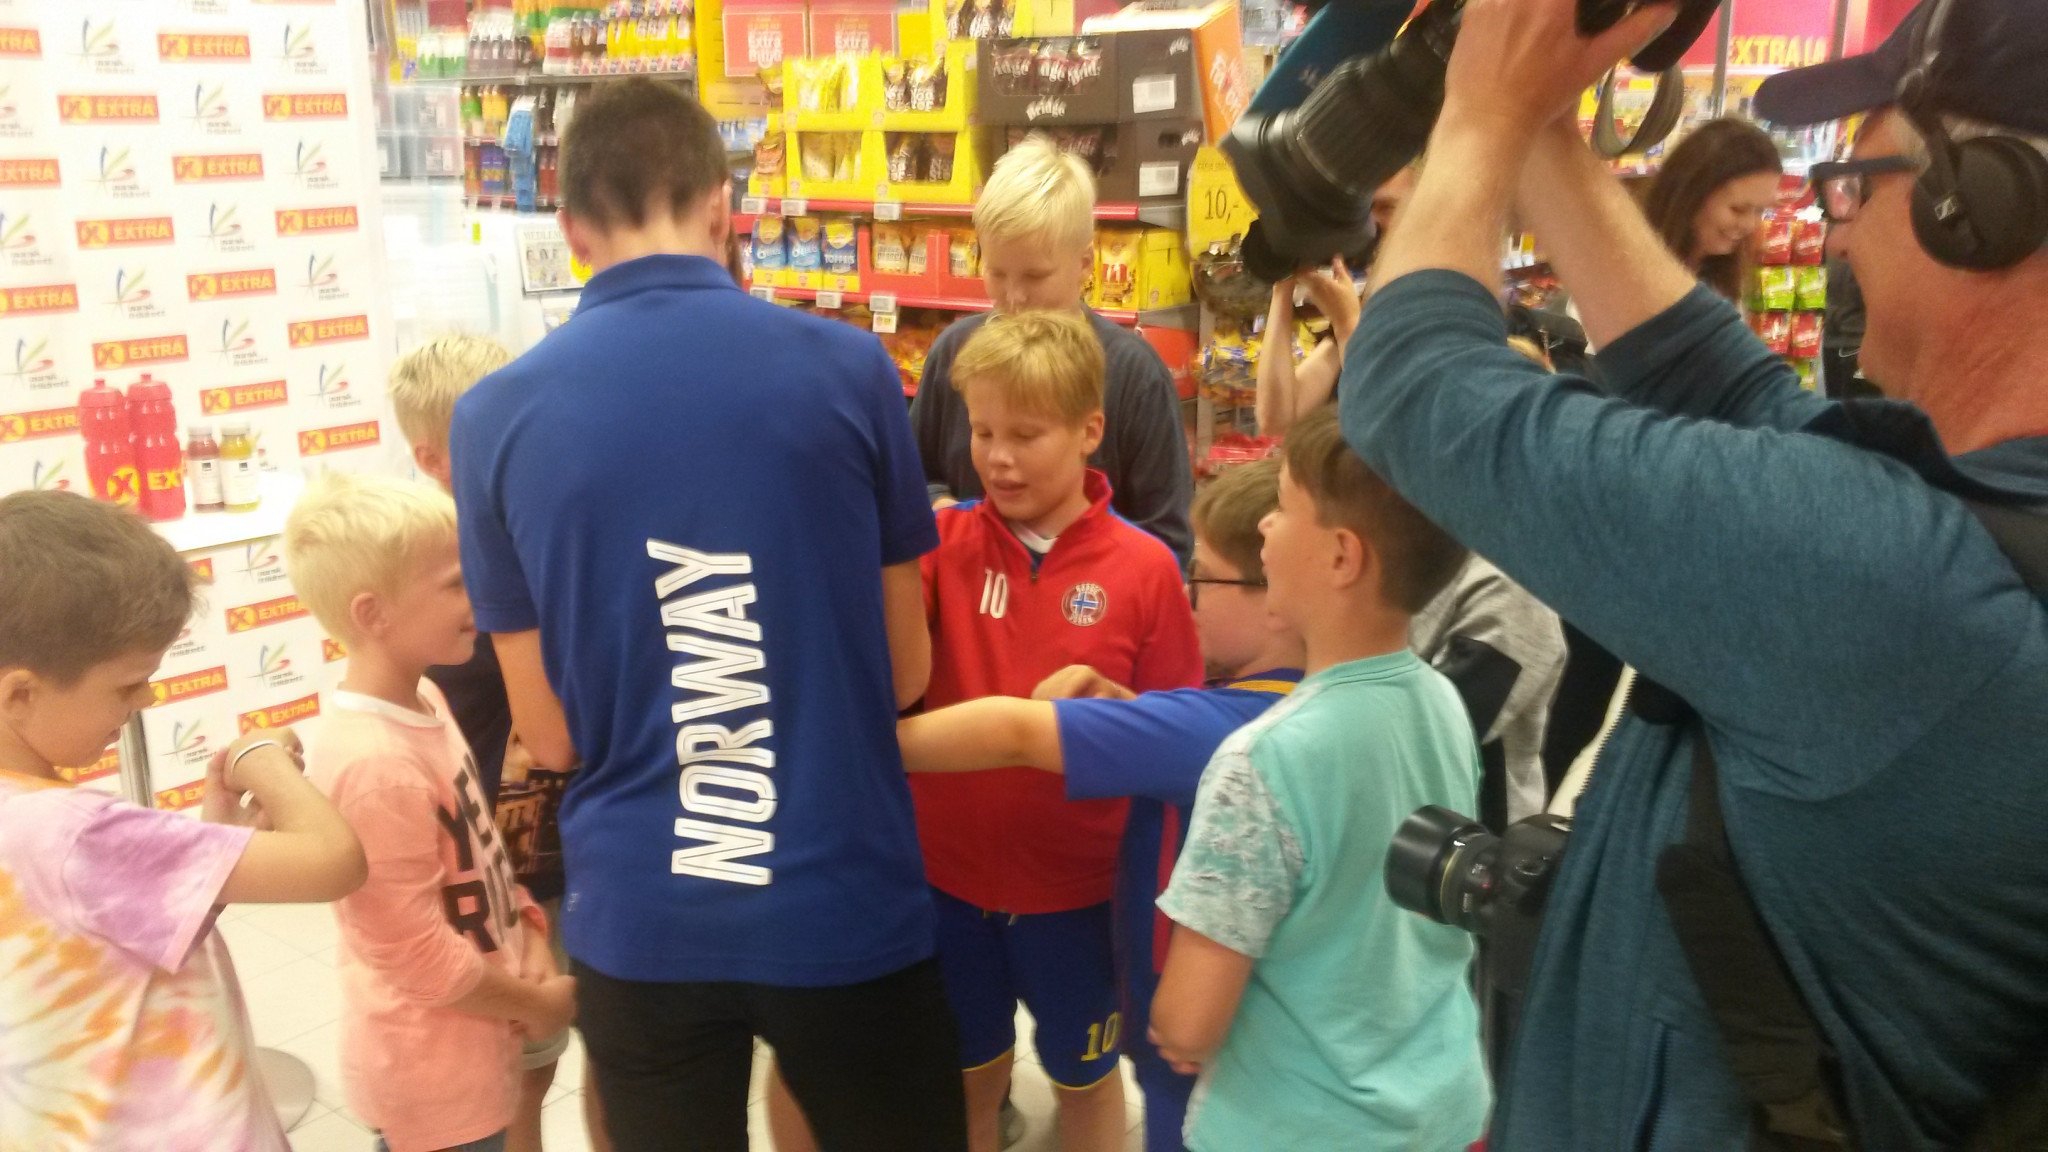 Jakob Ingebrigtsen gets an impromptu autograph signing underway at his local store in Sandnes ©ITG